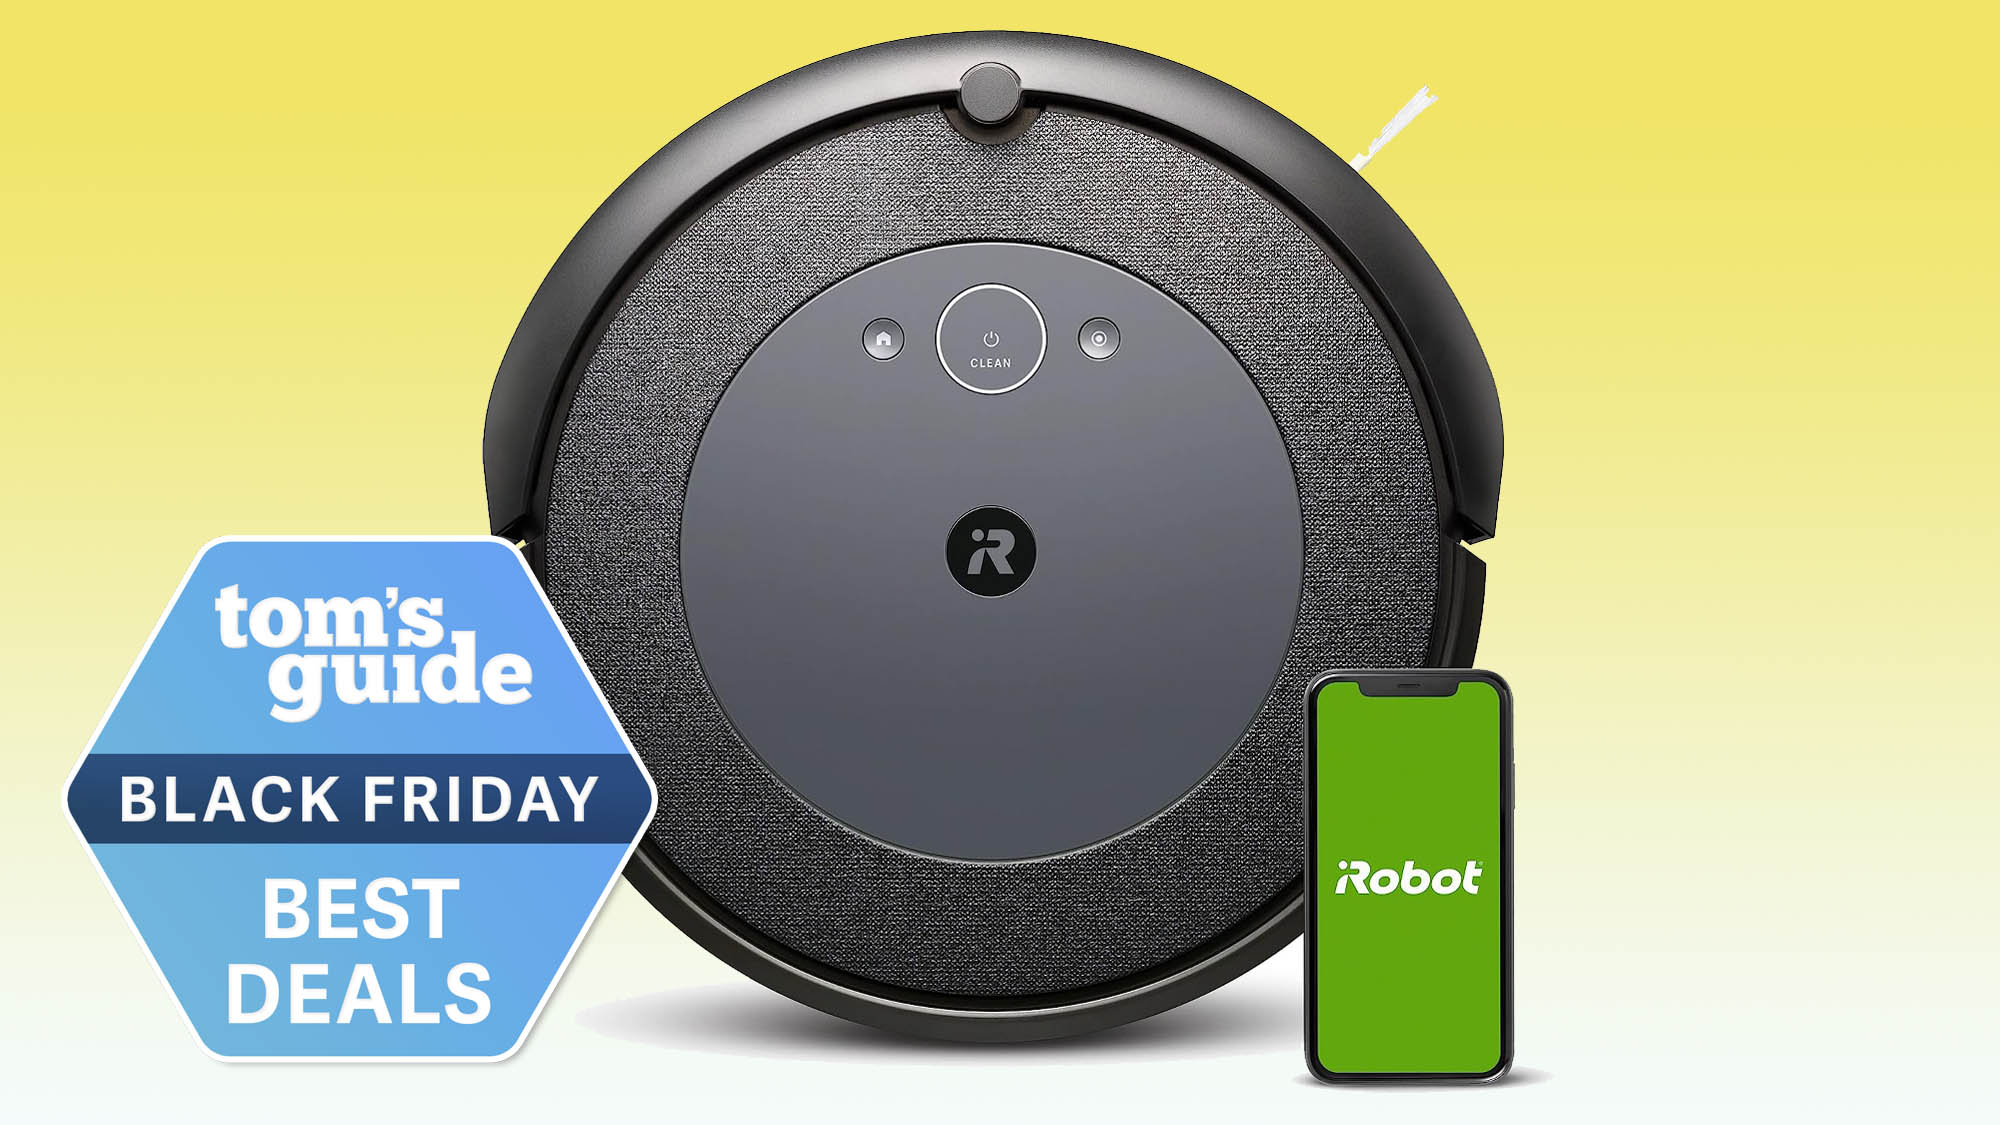 This Roomba robot vacuum Black Friday deal is the cheapest it's